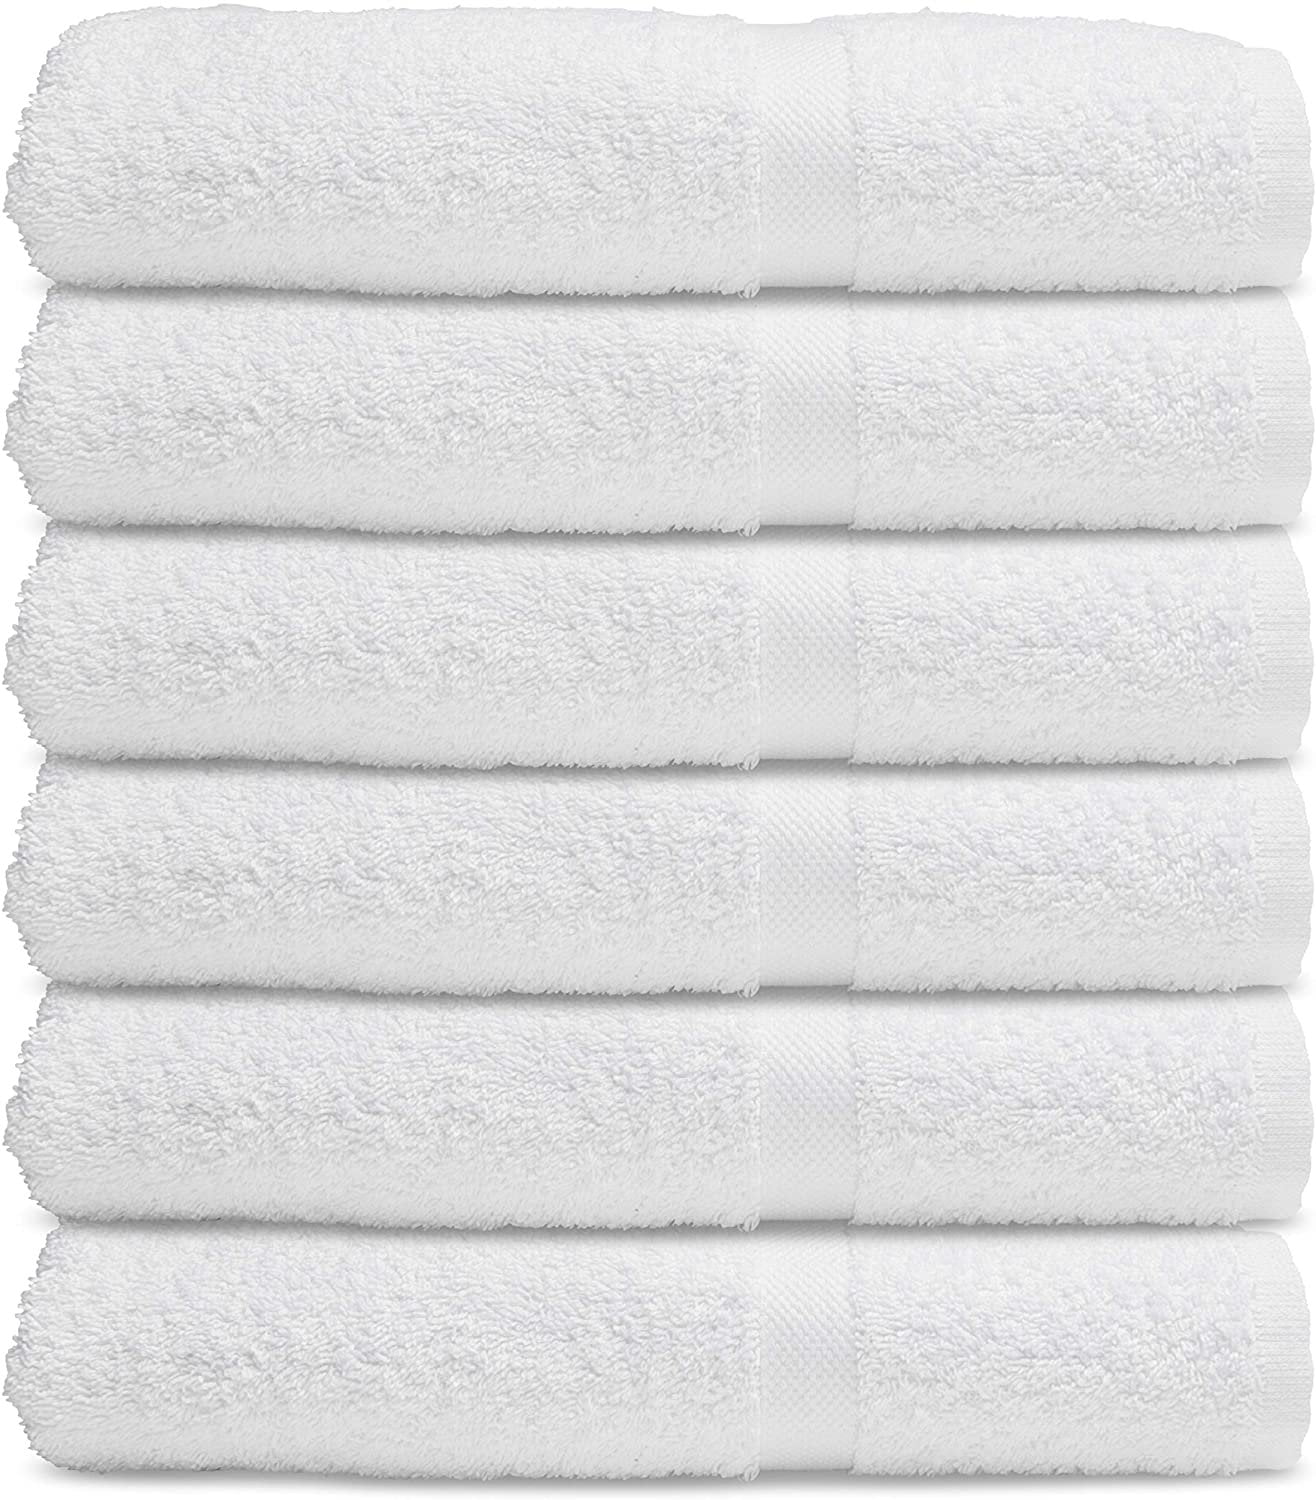 White Wash Cloths Pack of 6 Pcs Washcloth Cotton Towels for Hotel Home Gym Spa 